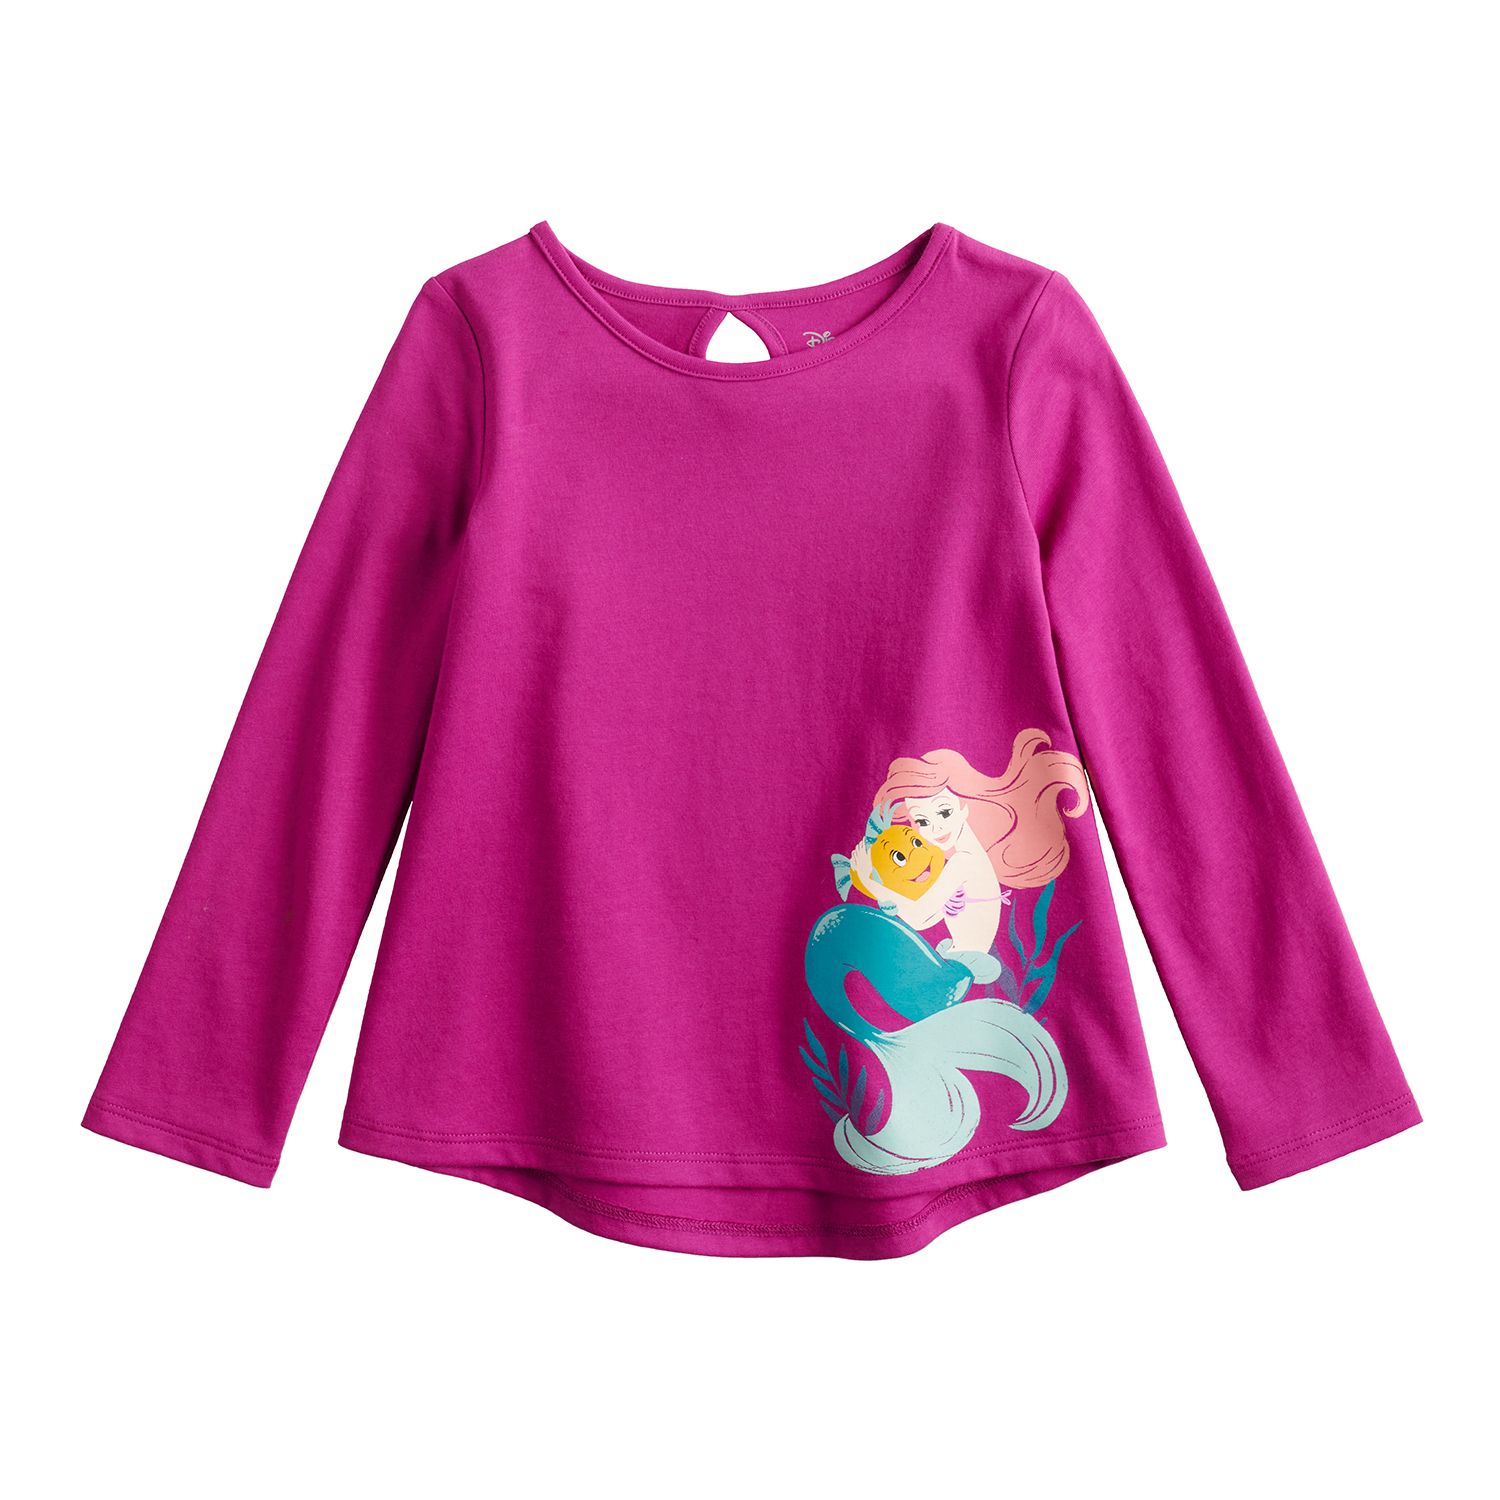 Image for Disney/Jumping Beans Disney's Ariel Toddler Girl Long-Sleeve Swing Tee by Jumping Beans® at Kohl's.